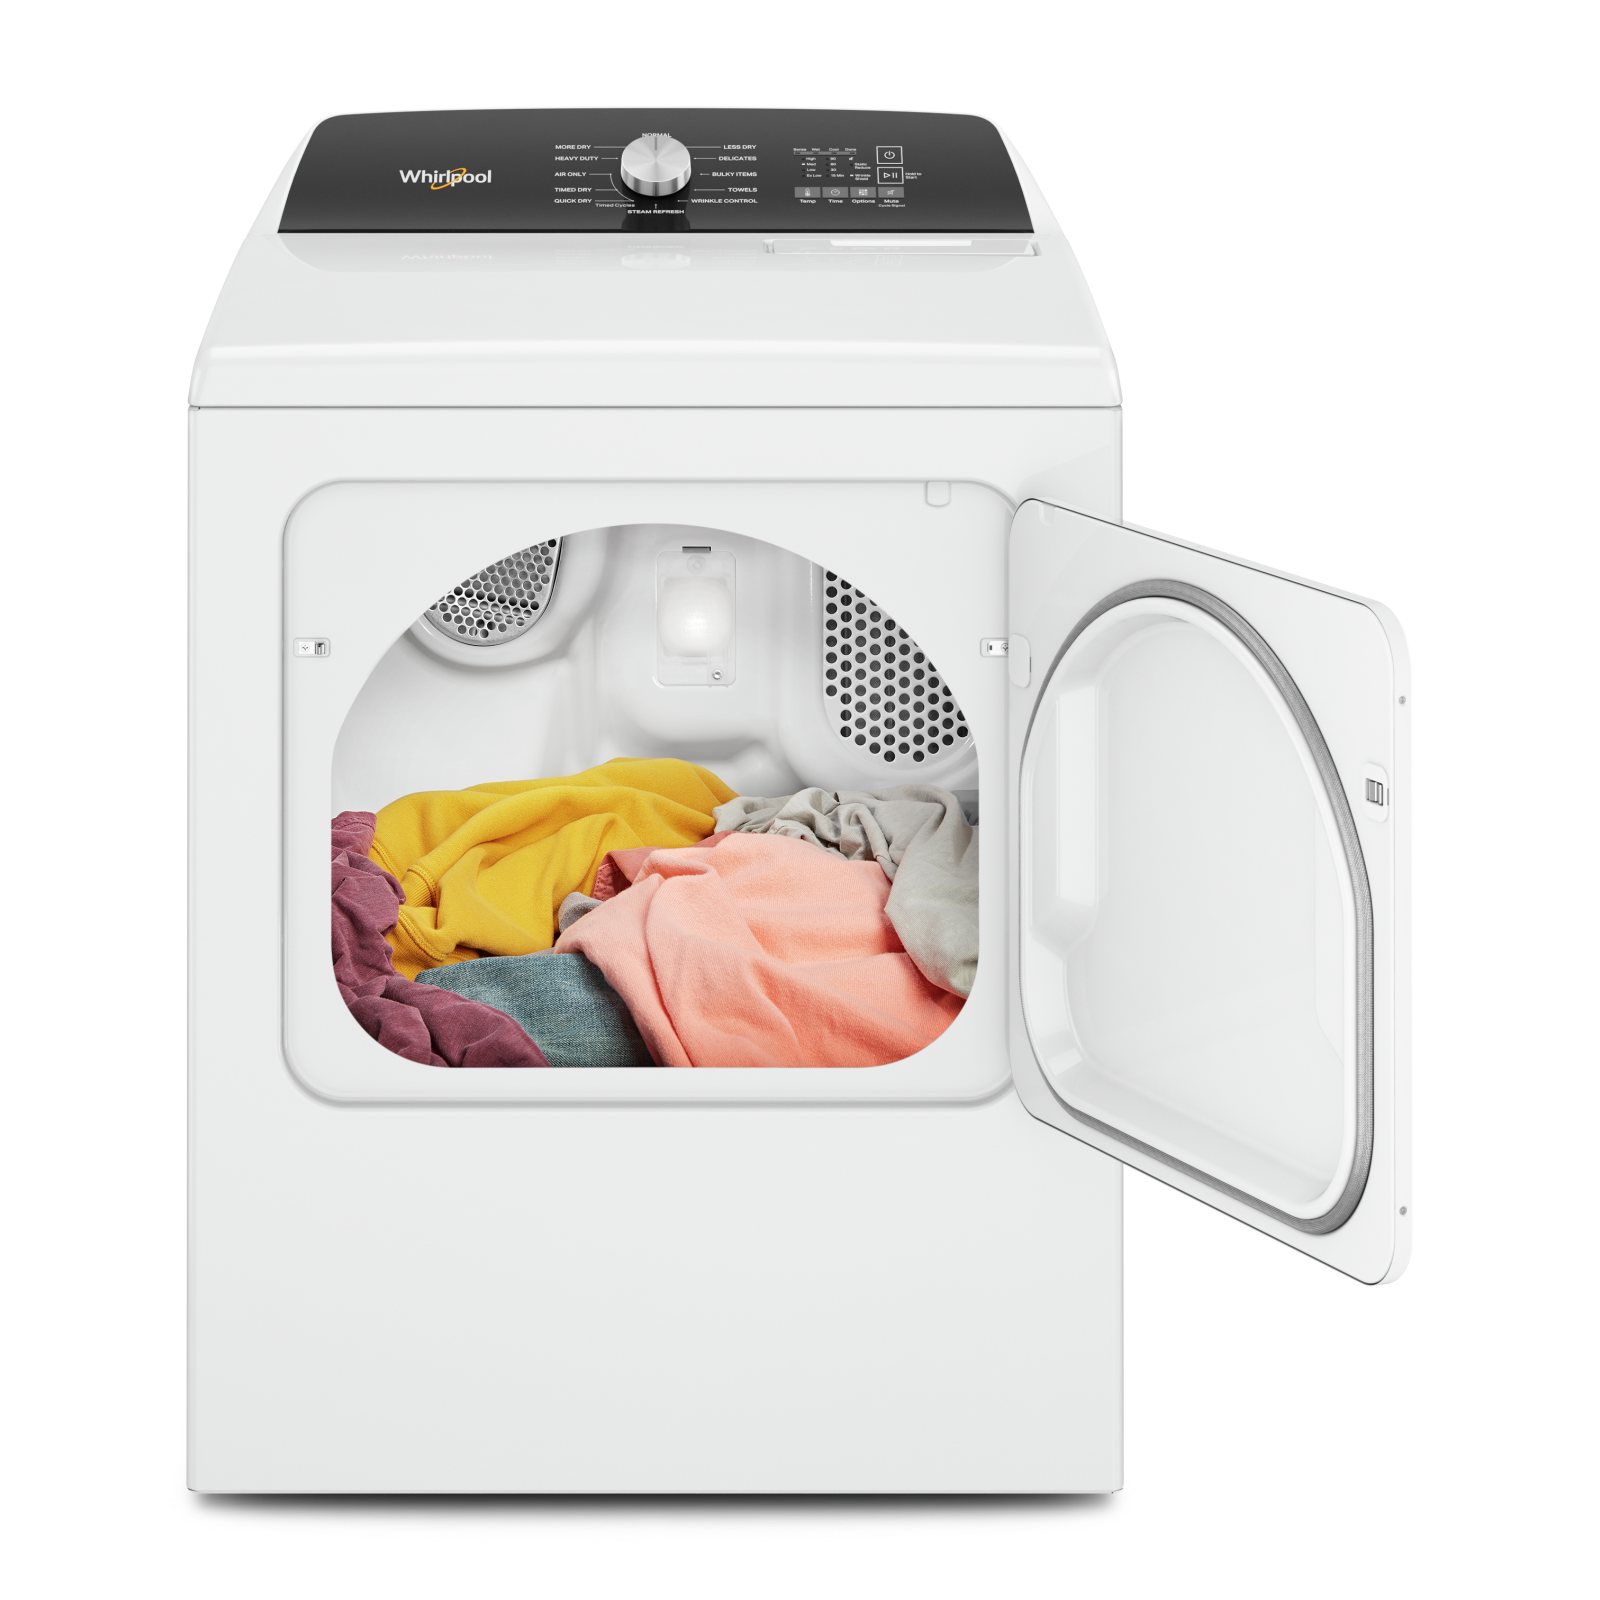 Whirlpool - 7 cu. Ft  Electric Dryer in White - YWED5050LW